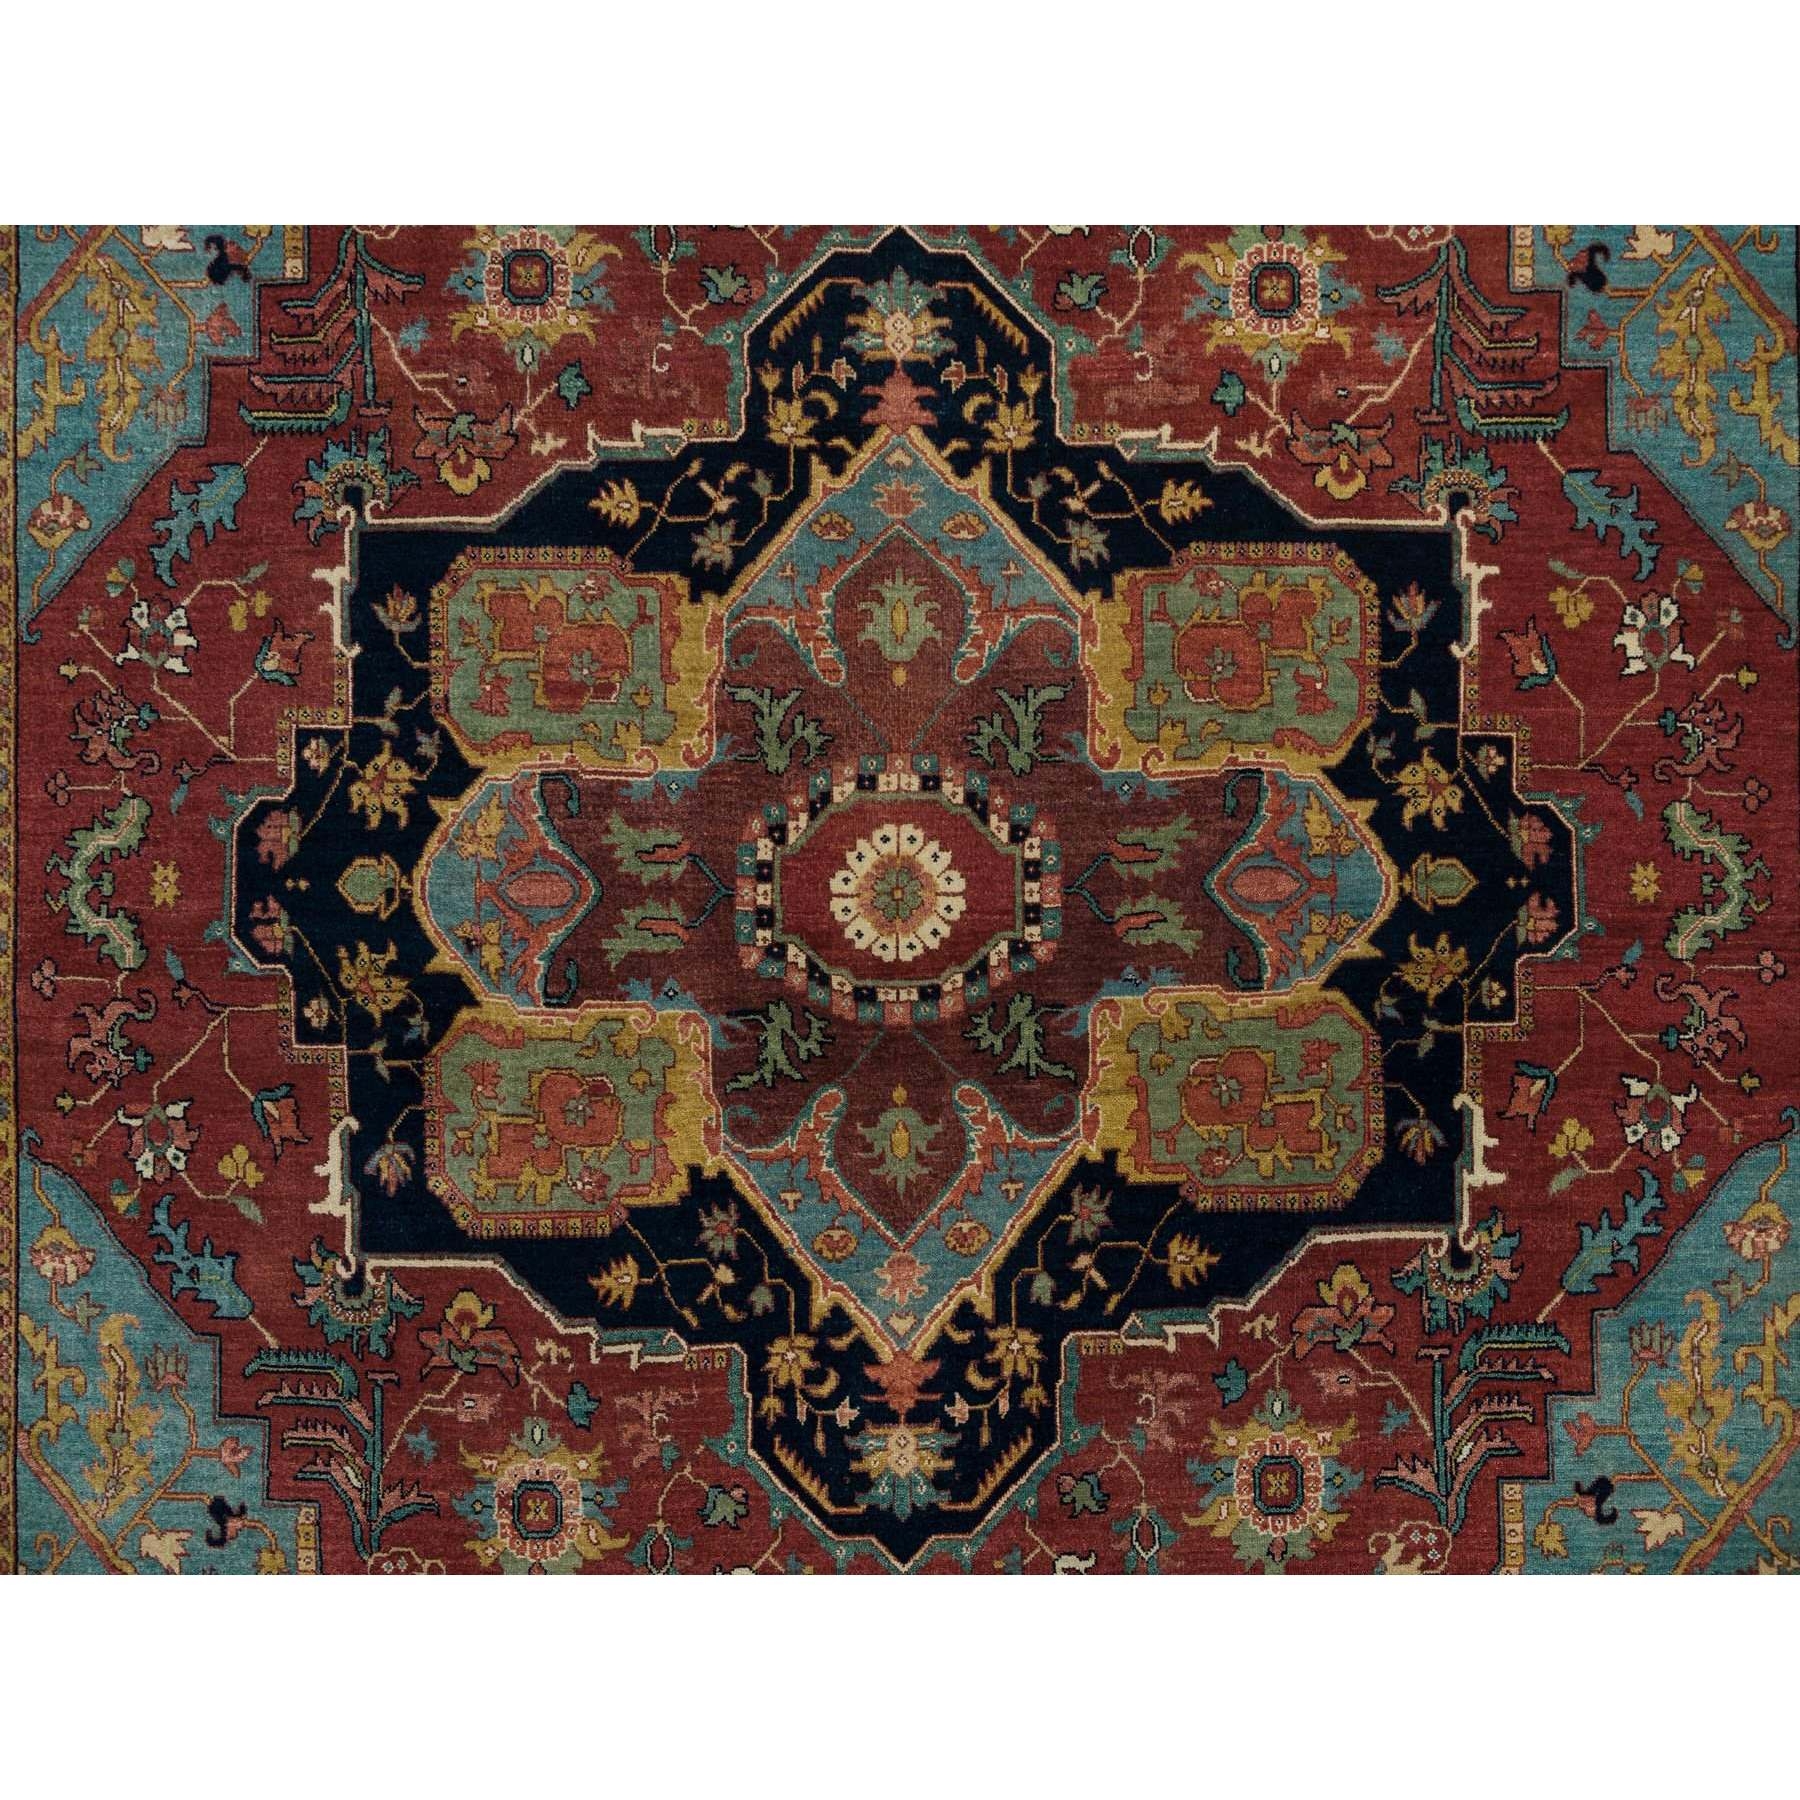 8'x10'1" Brick Red, Pure Wool, Antiqued Fine Heriz Re-Creation, Soft and Plush, Natural Dyes, Densely Woven, Hand Woven, Oriental Rug 